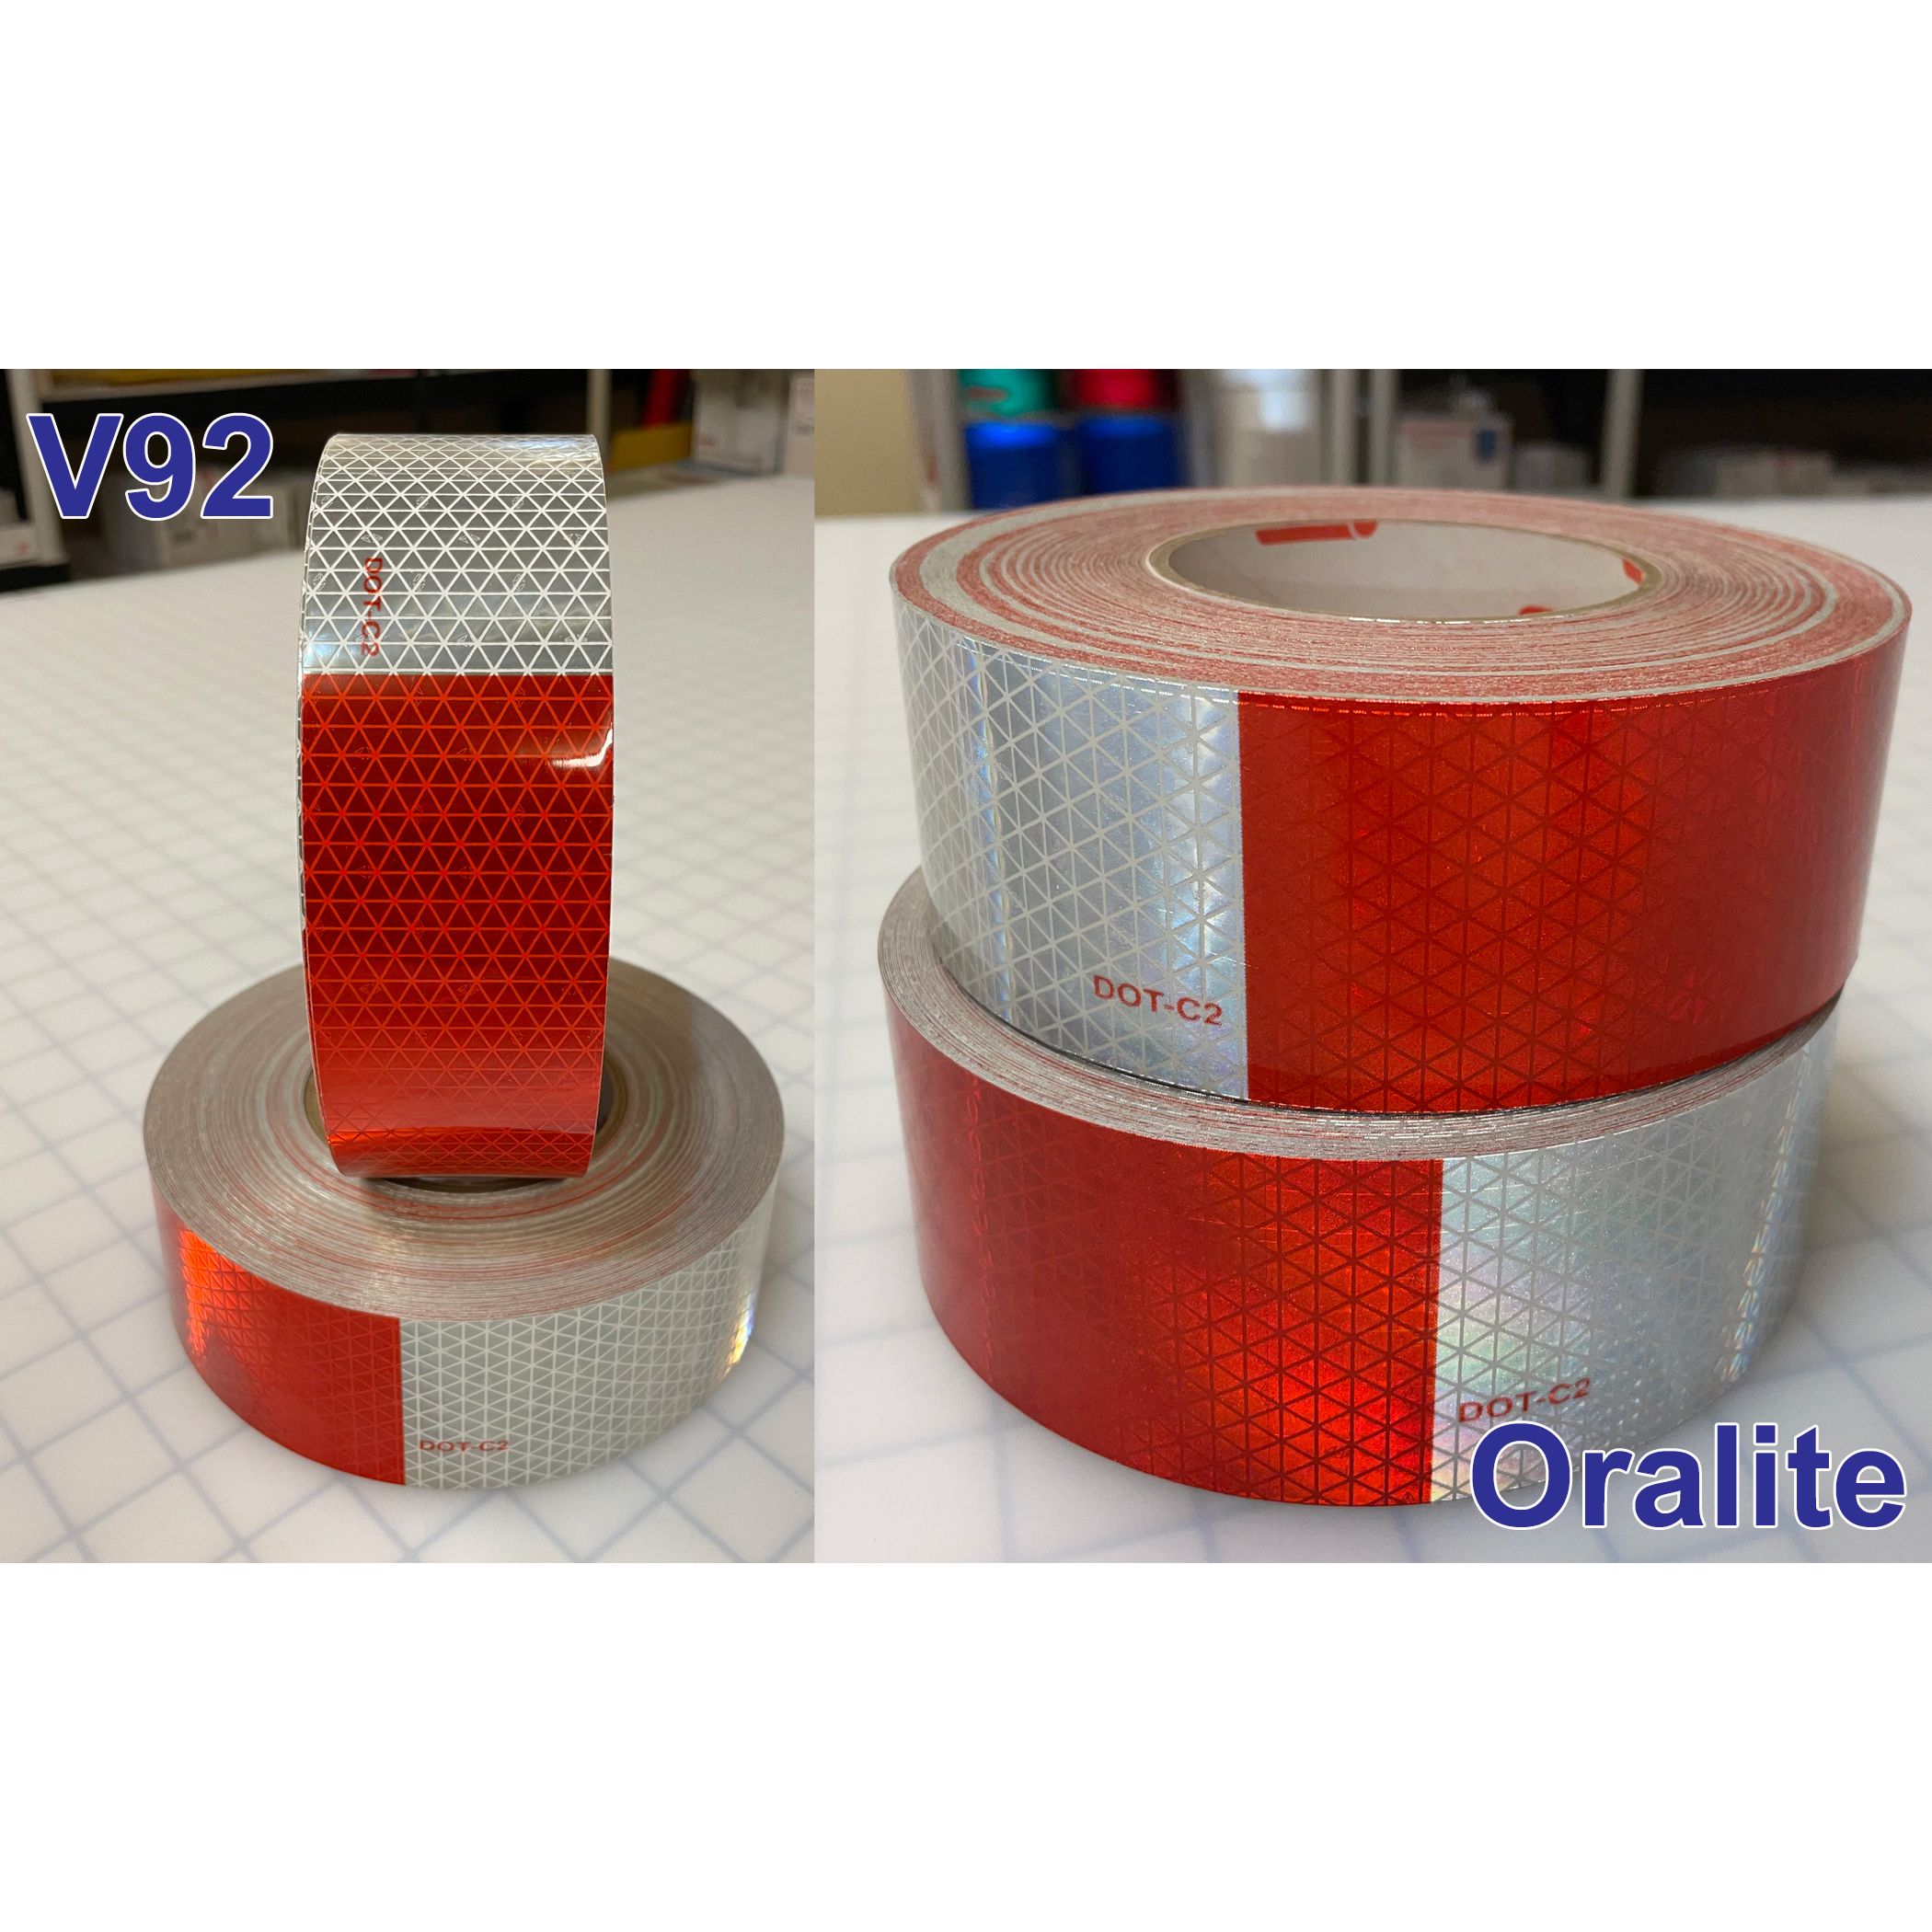 Oralite Conspicuity Tape 2 inch x 150' - Diamond Plate Pattern